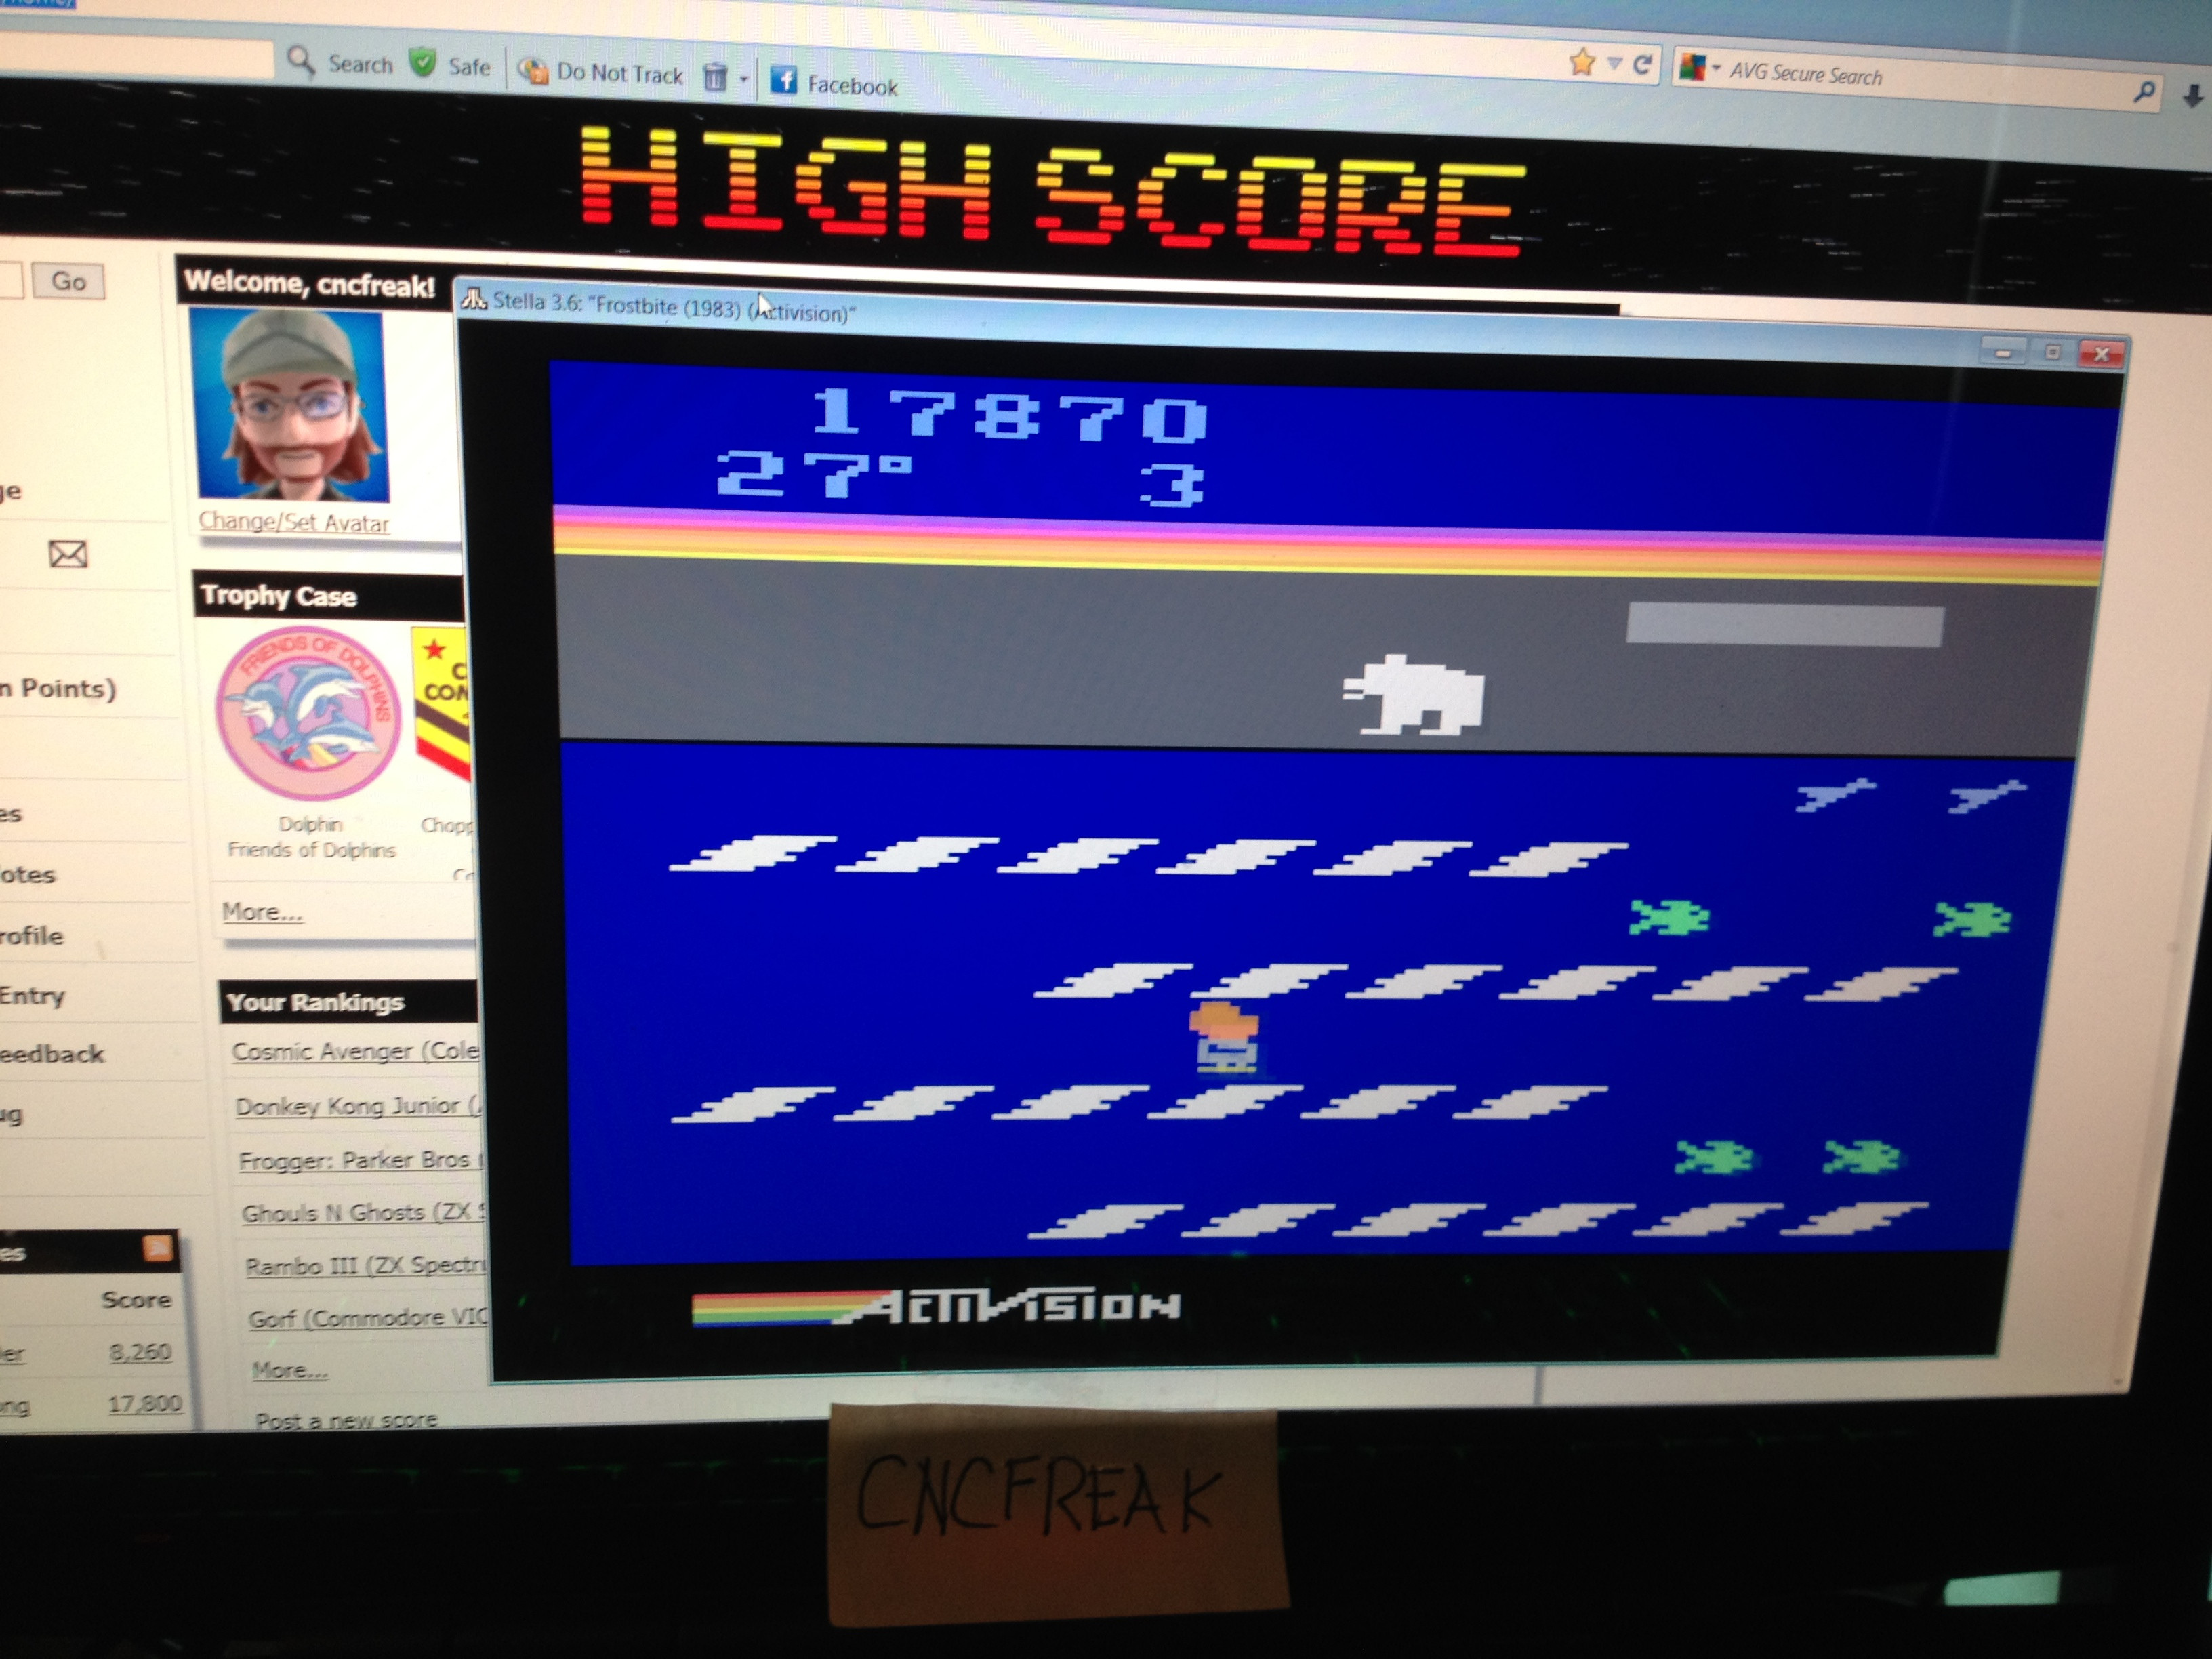 cncfreak: Frostbite (Atari 2600 Emulated) 17,870 points on 2013-11-04 05:52:50